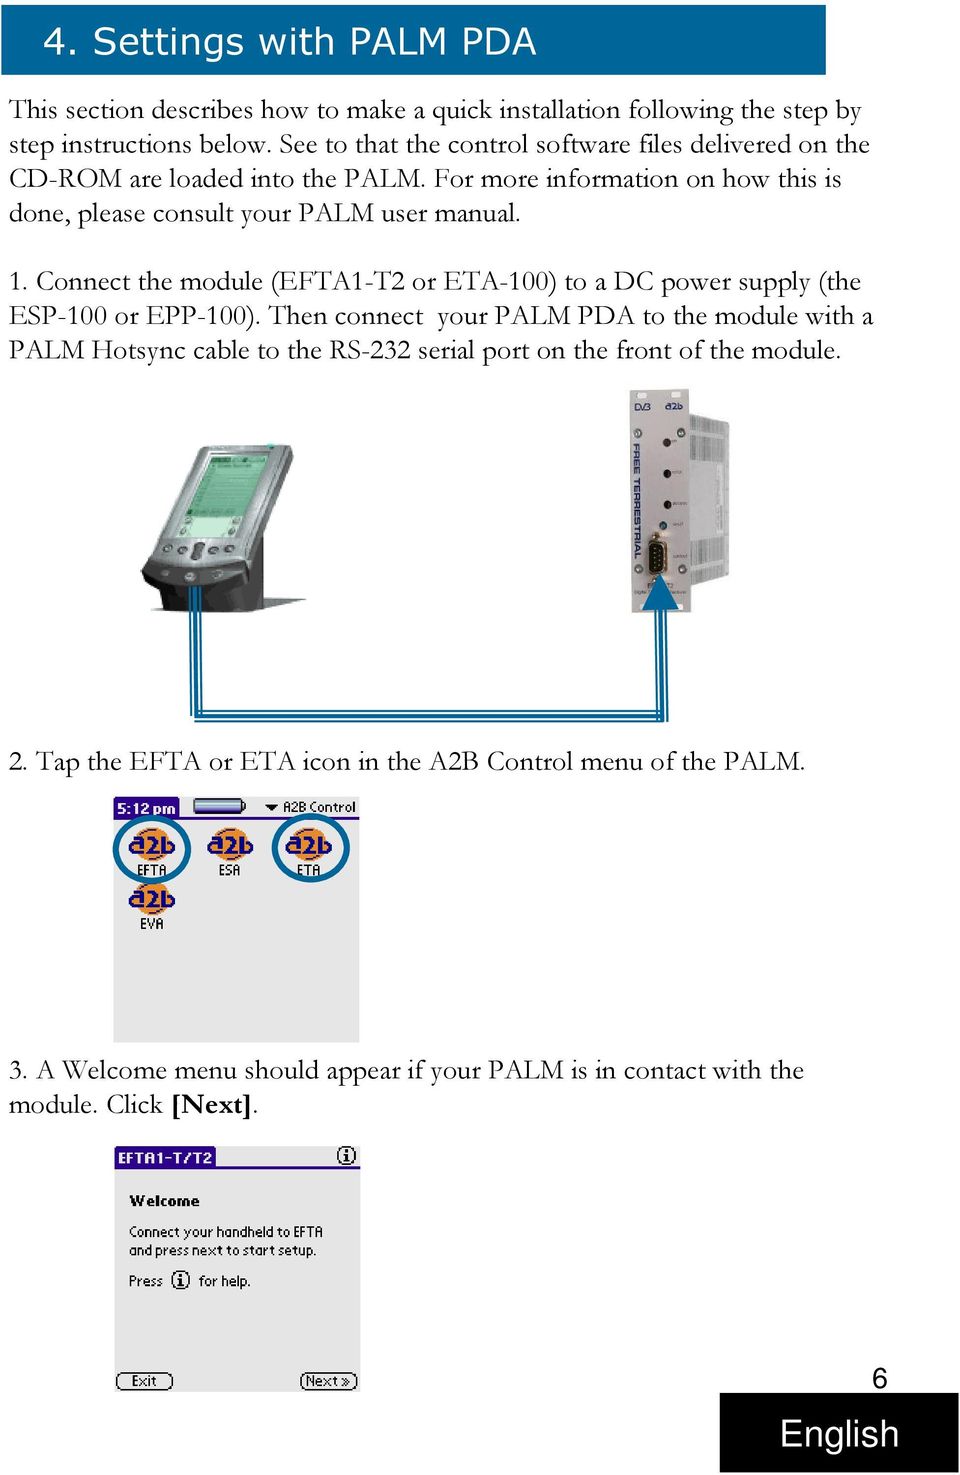 1. Connect the module (EFTA1-T2 or ETA-100) to a DC power supply (the ESP-100 or EPP-100).